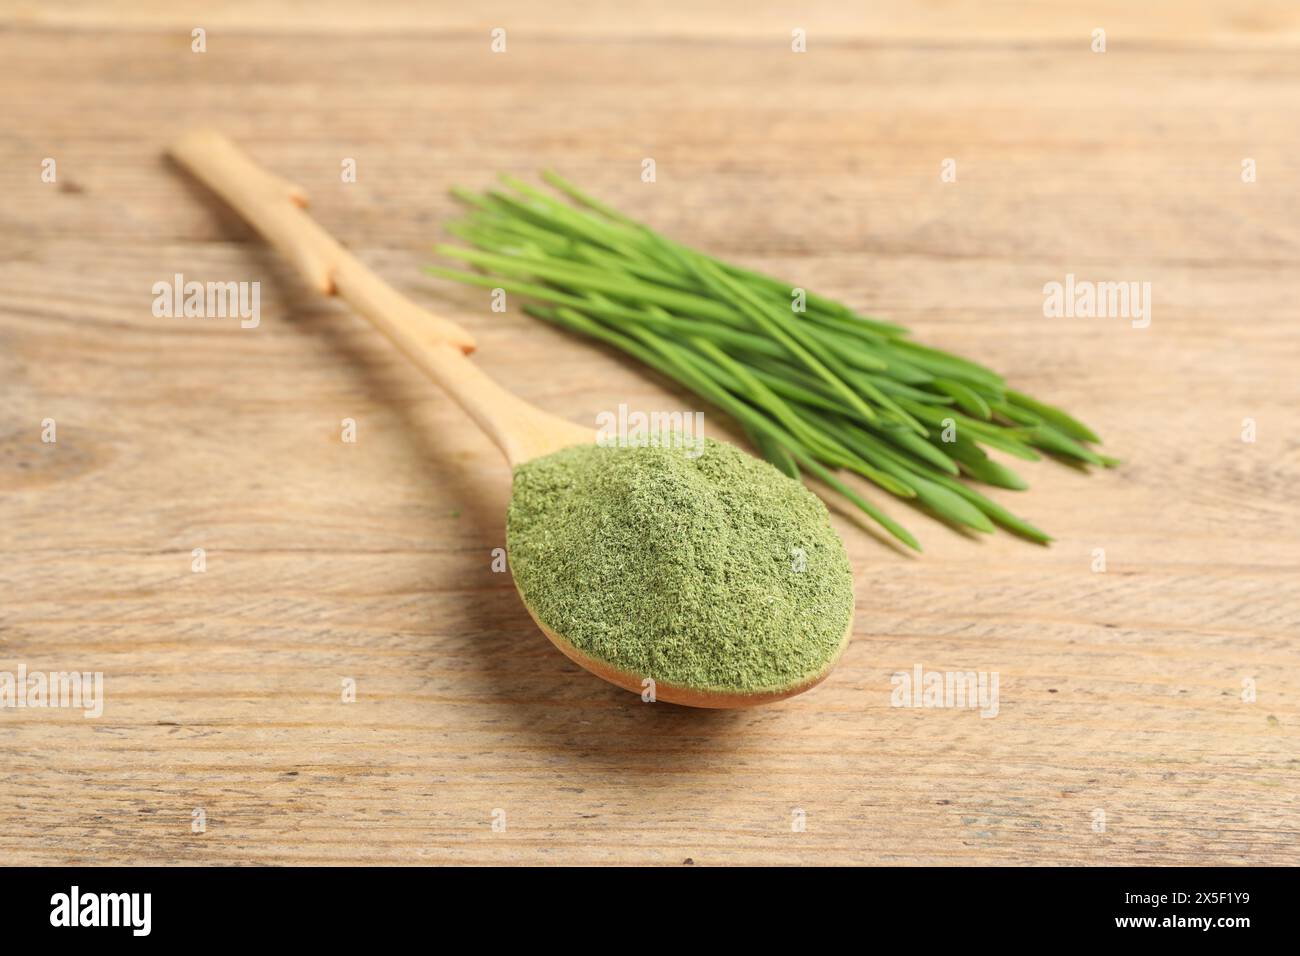 Wheat grass powder in spoon and fresh green sprouts on wooden table, closeup Stock Photo